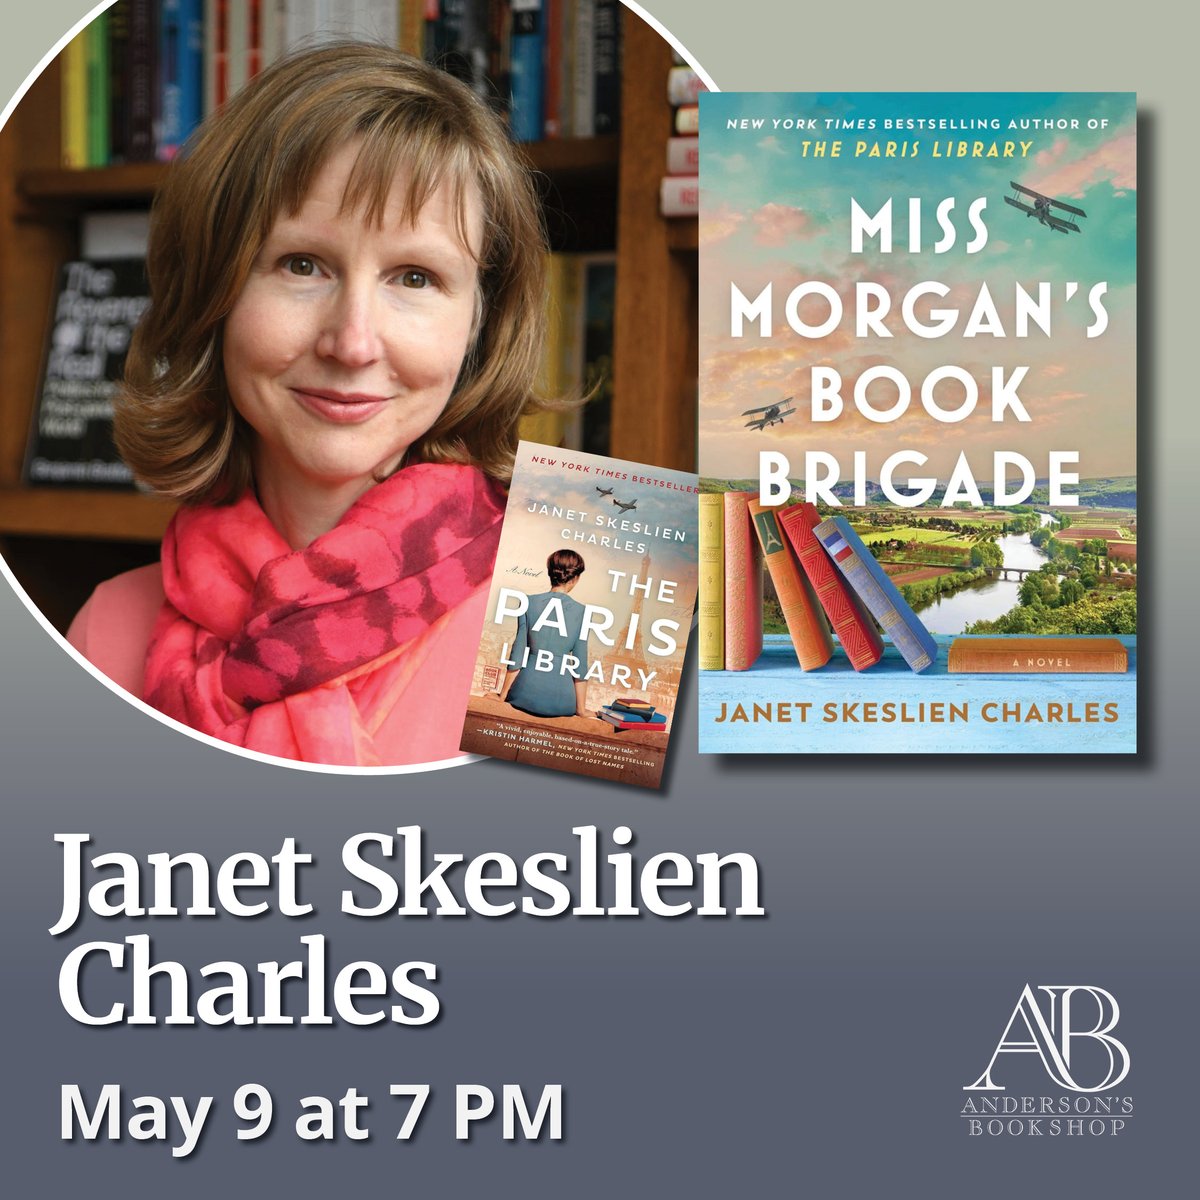 MAY 9th: GREAT Book Club Rec! Come meet Janet Skeslien Charles @skesliencharles and hear all about Miss Morgan's Book Brigade in our Naperville store! Janey will present, take Q&A and have a photo/signing line! TICKETS: JanetSkeslienCharles.eventcombo.com